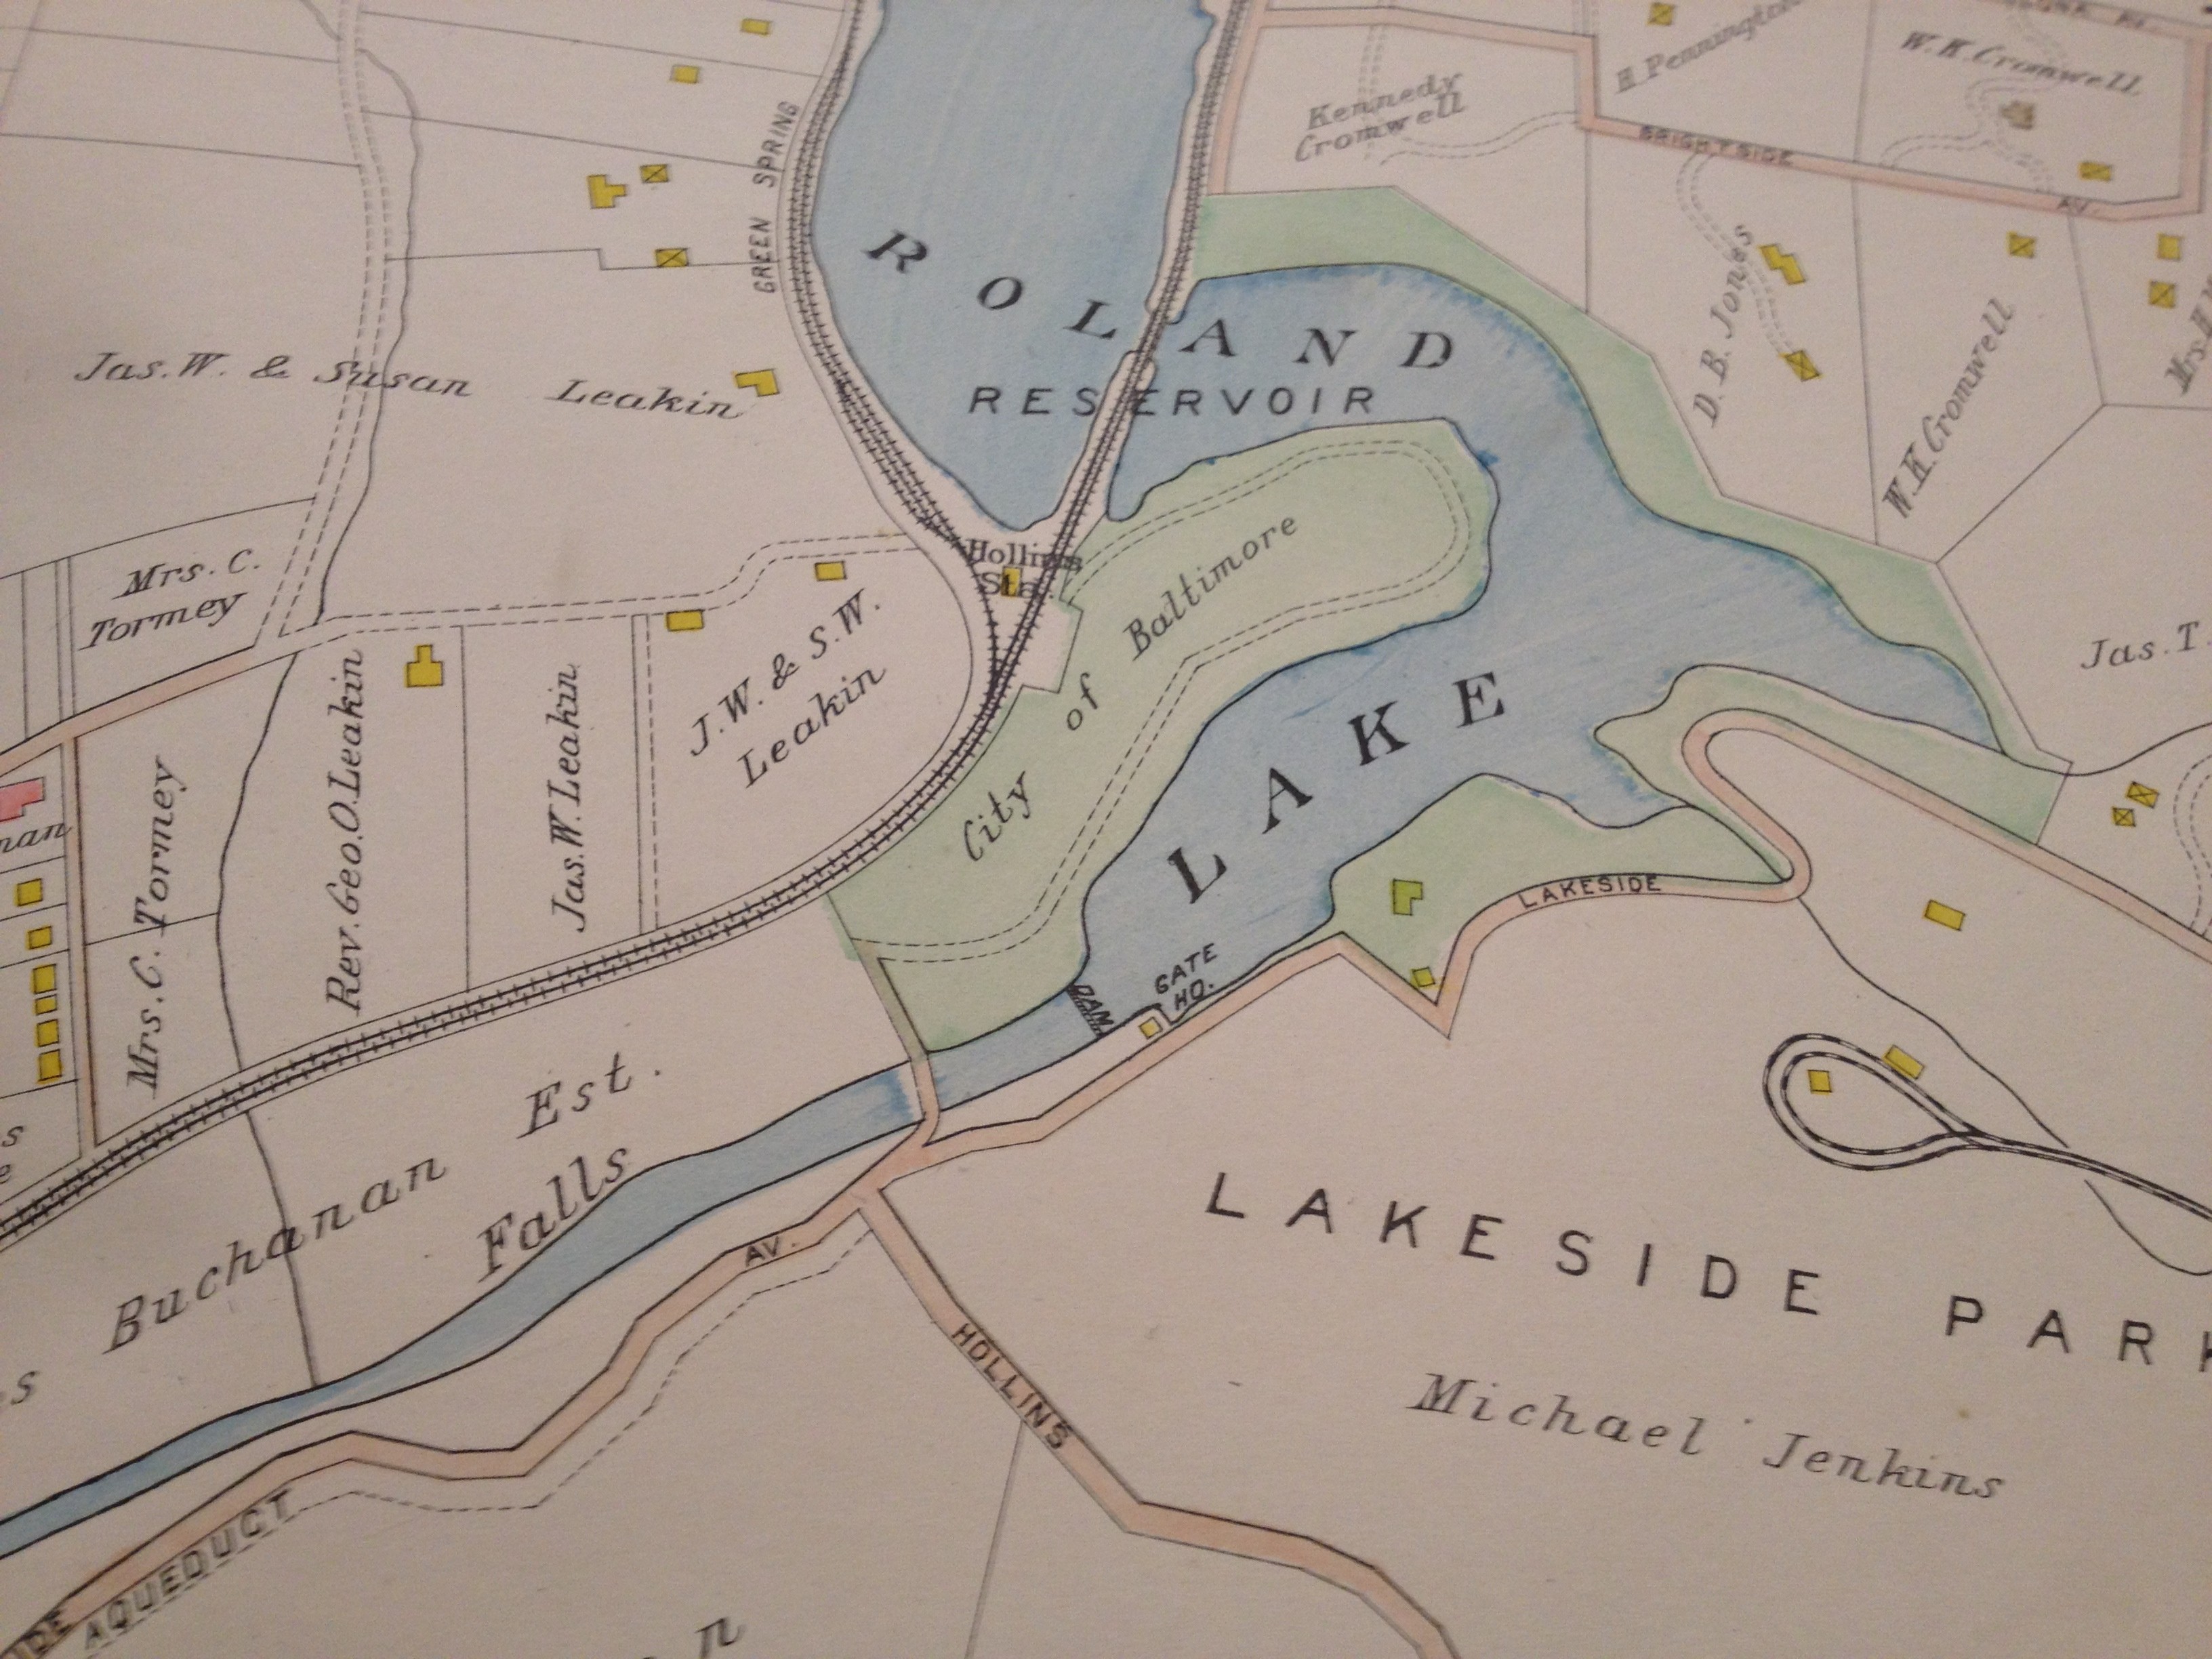 The Lake Roland dam, eight miles north of downtown on the Jones Falls. Taken from the Bromley Atlas.